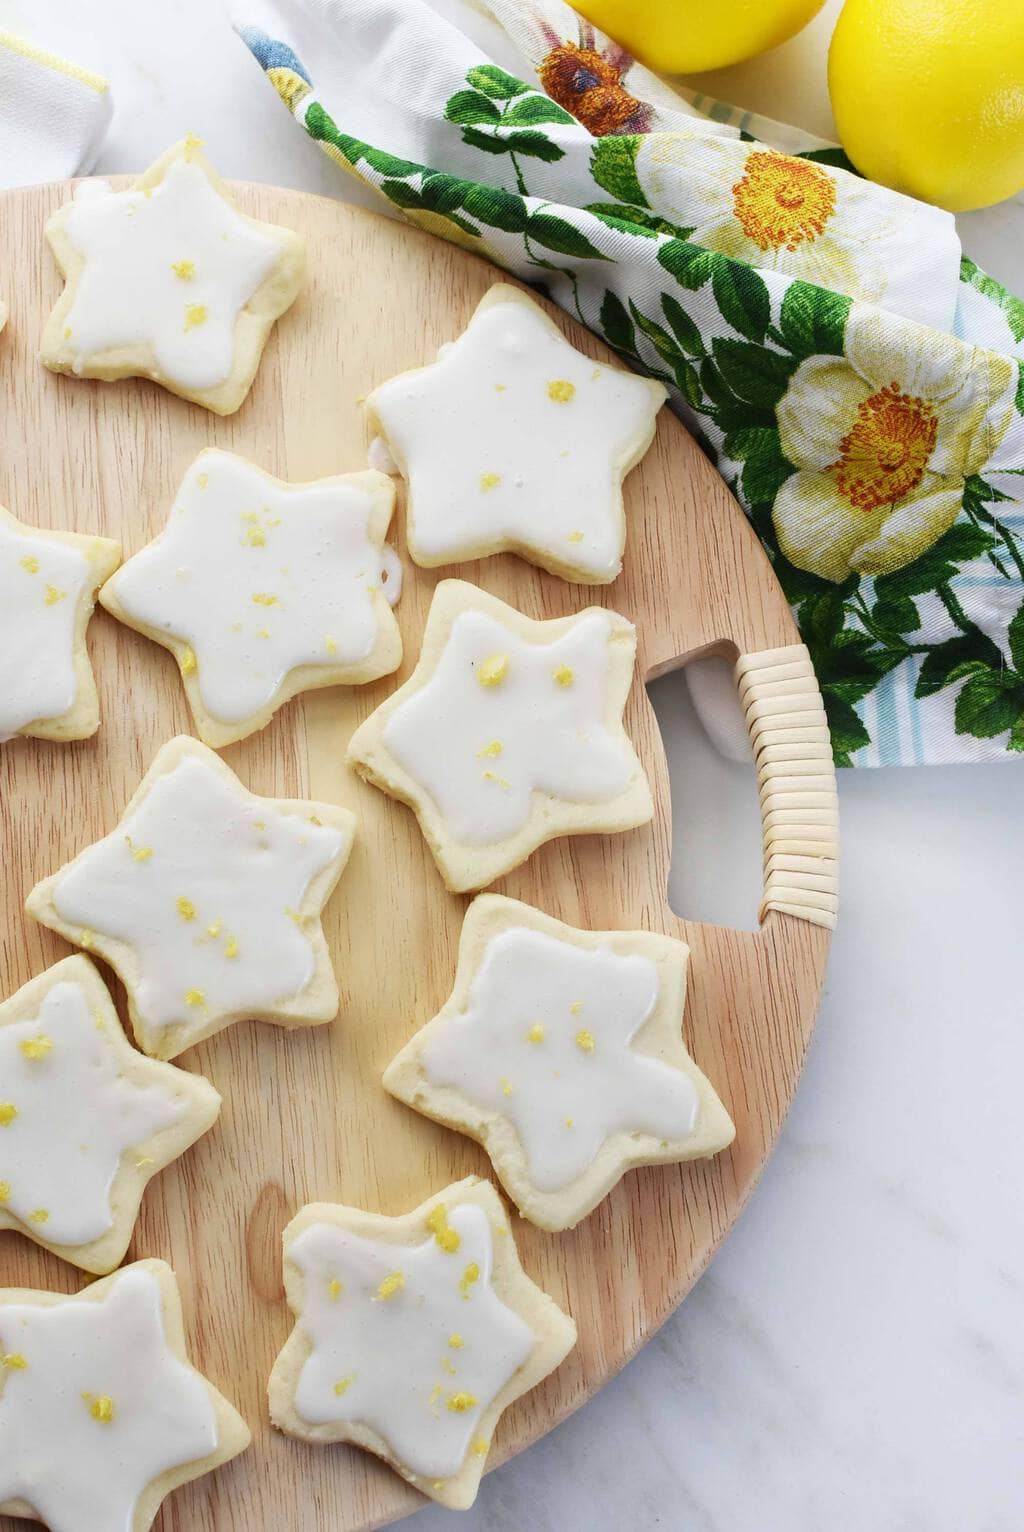 Star shaped shortbread cookies with lemon icing.